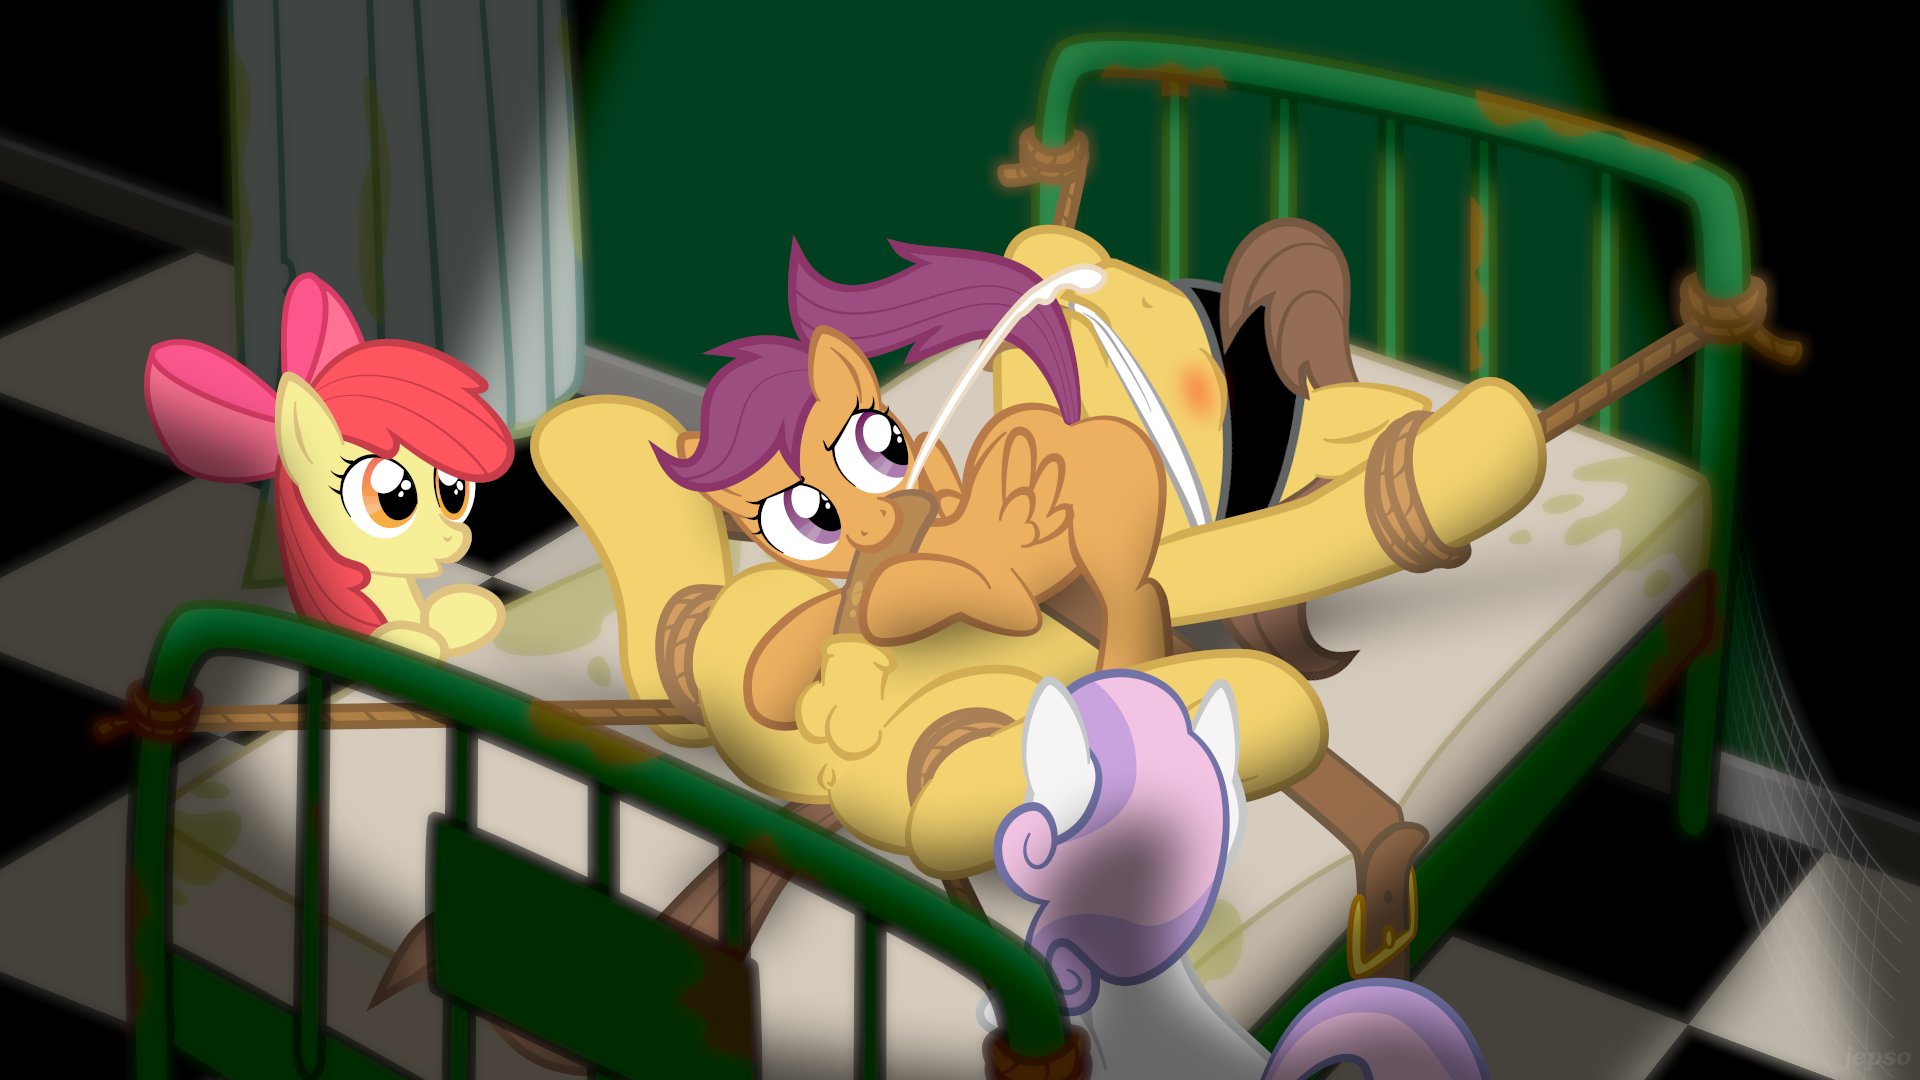 Sweetbelle Scootaloo Porn - Showing Porn Images for Cutie mark crusaders sfm porn | www.porndaa.com